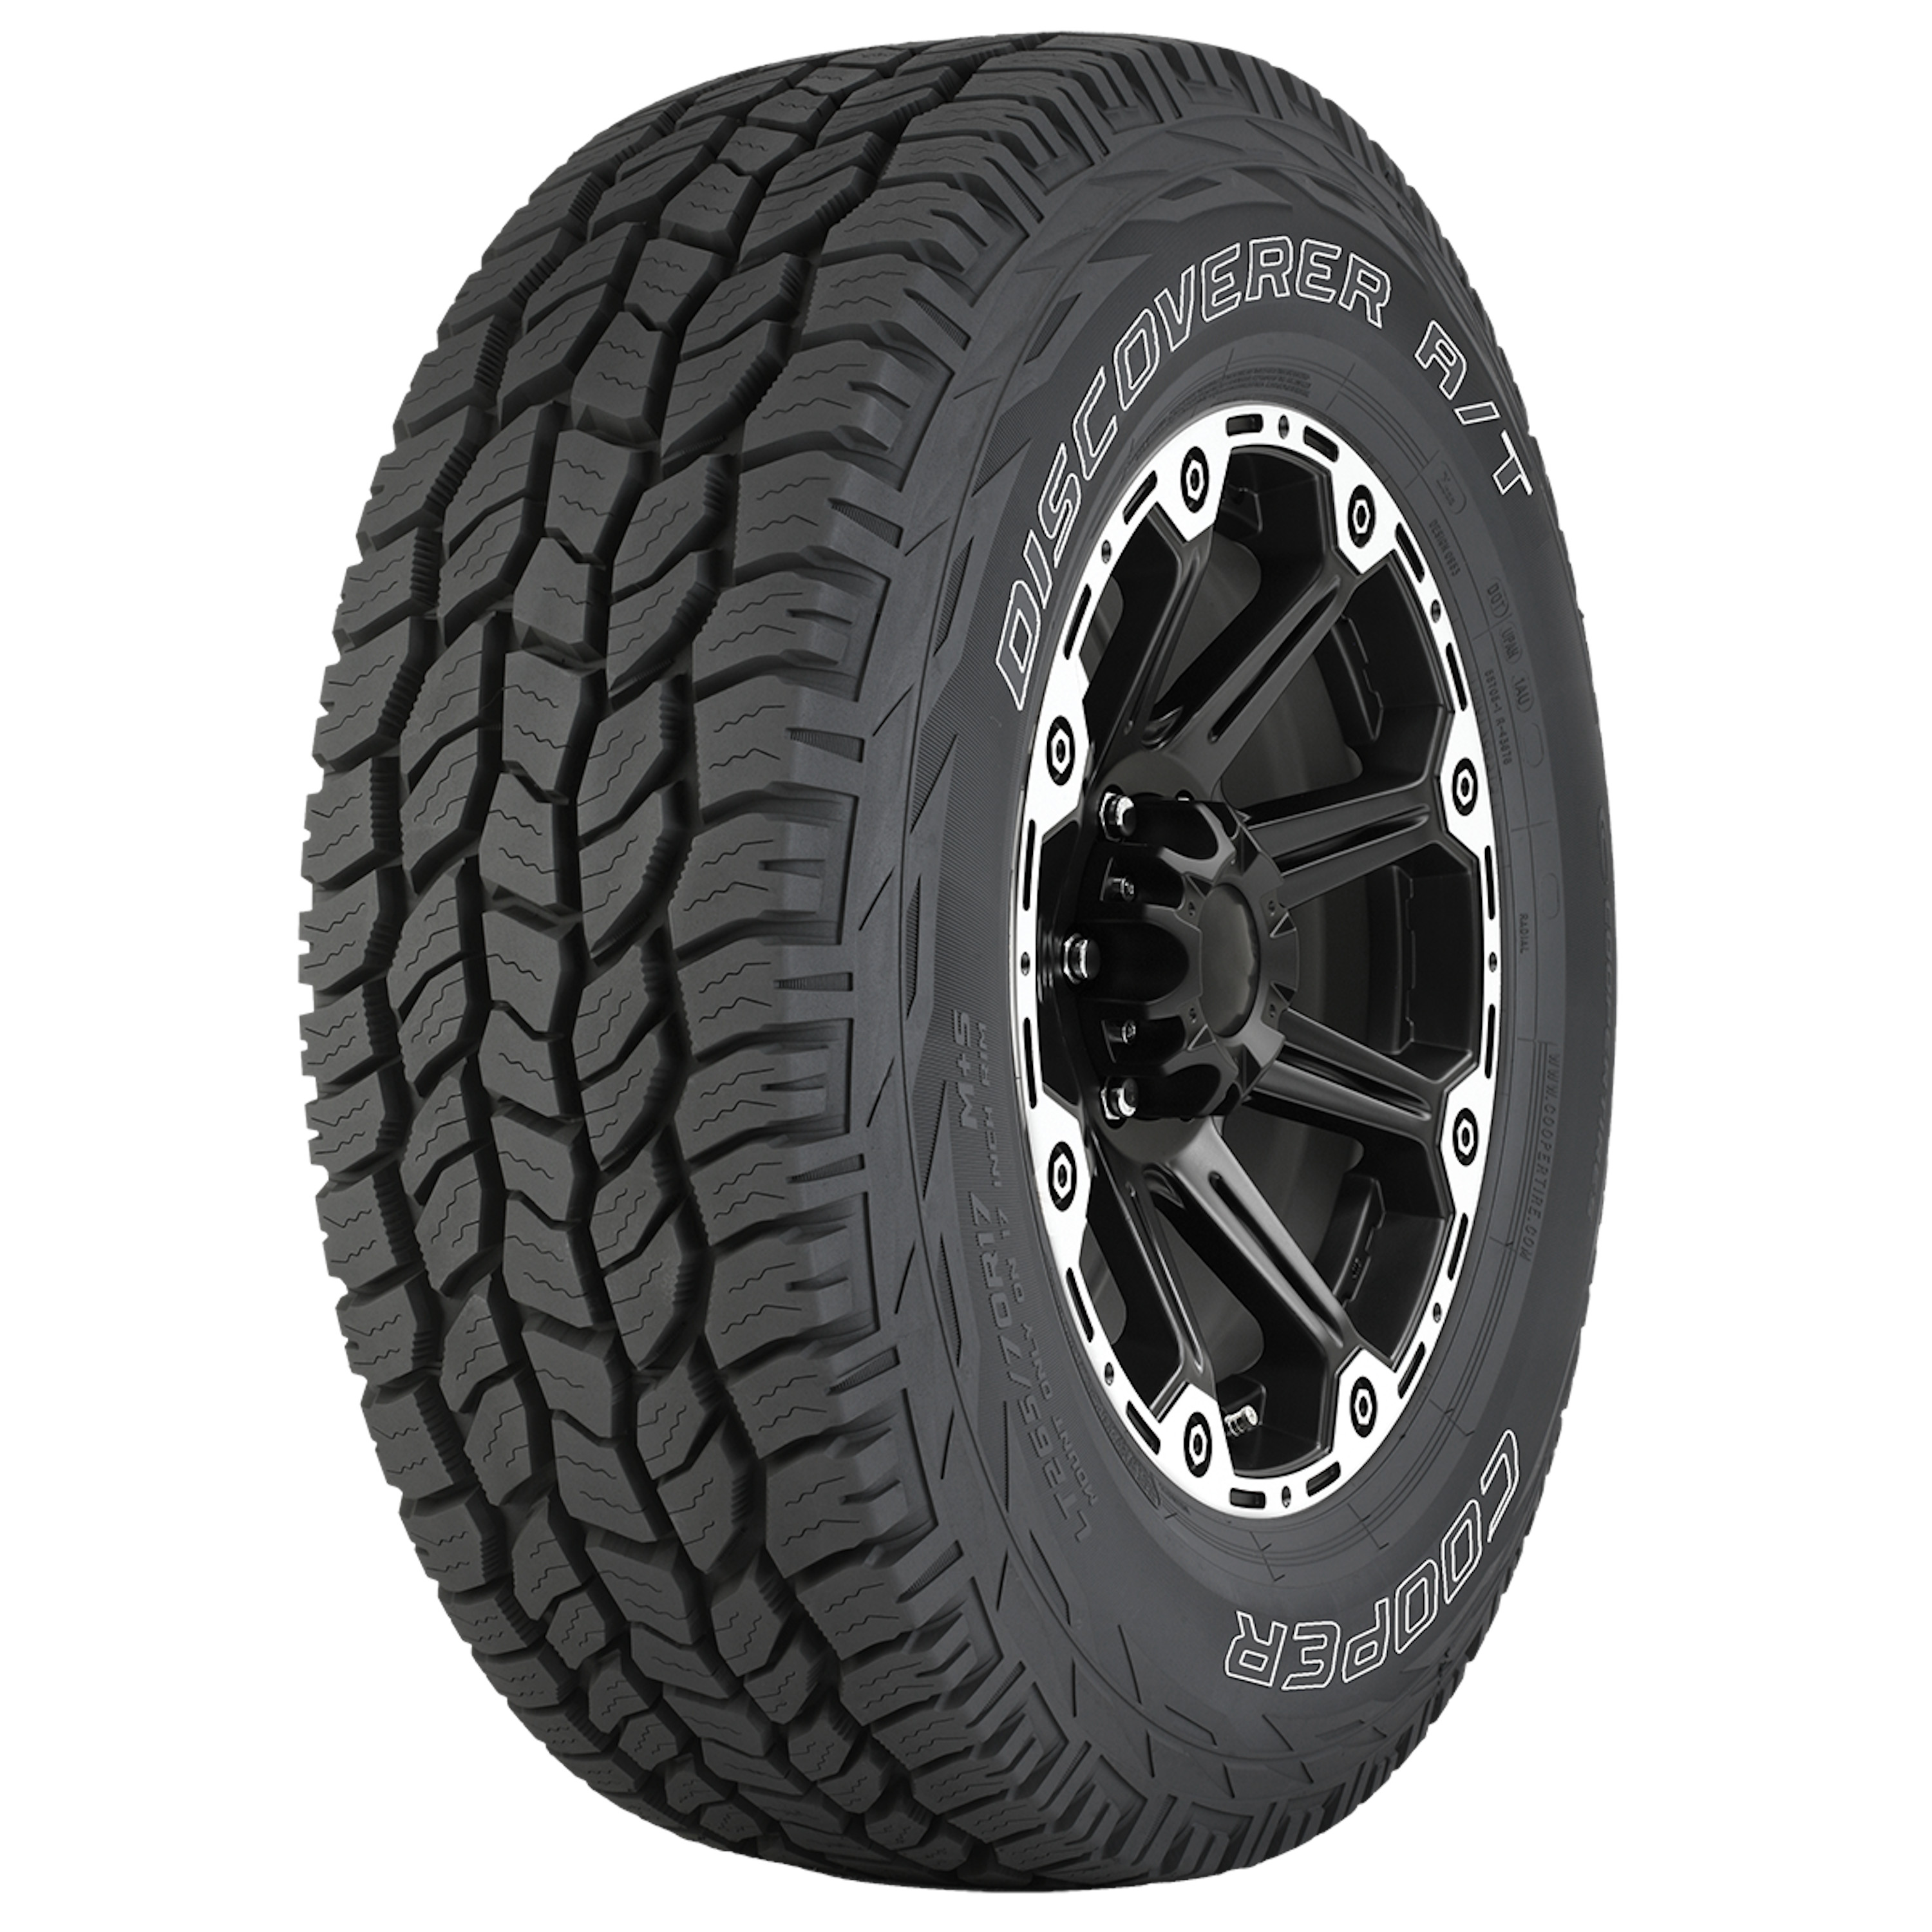 Cooper DISCOVERER A/T All-Season 245/65R17 107T Tire 60,000